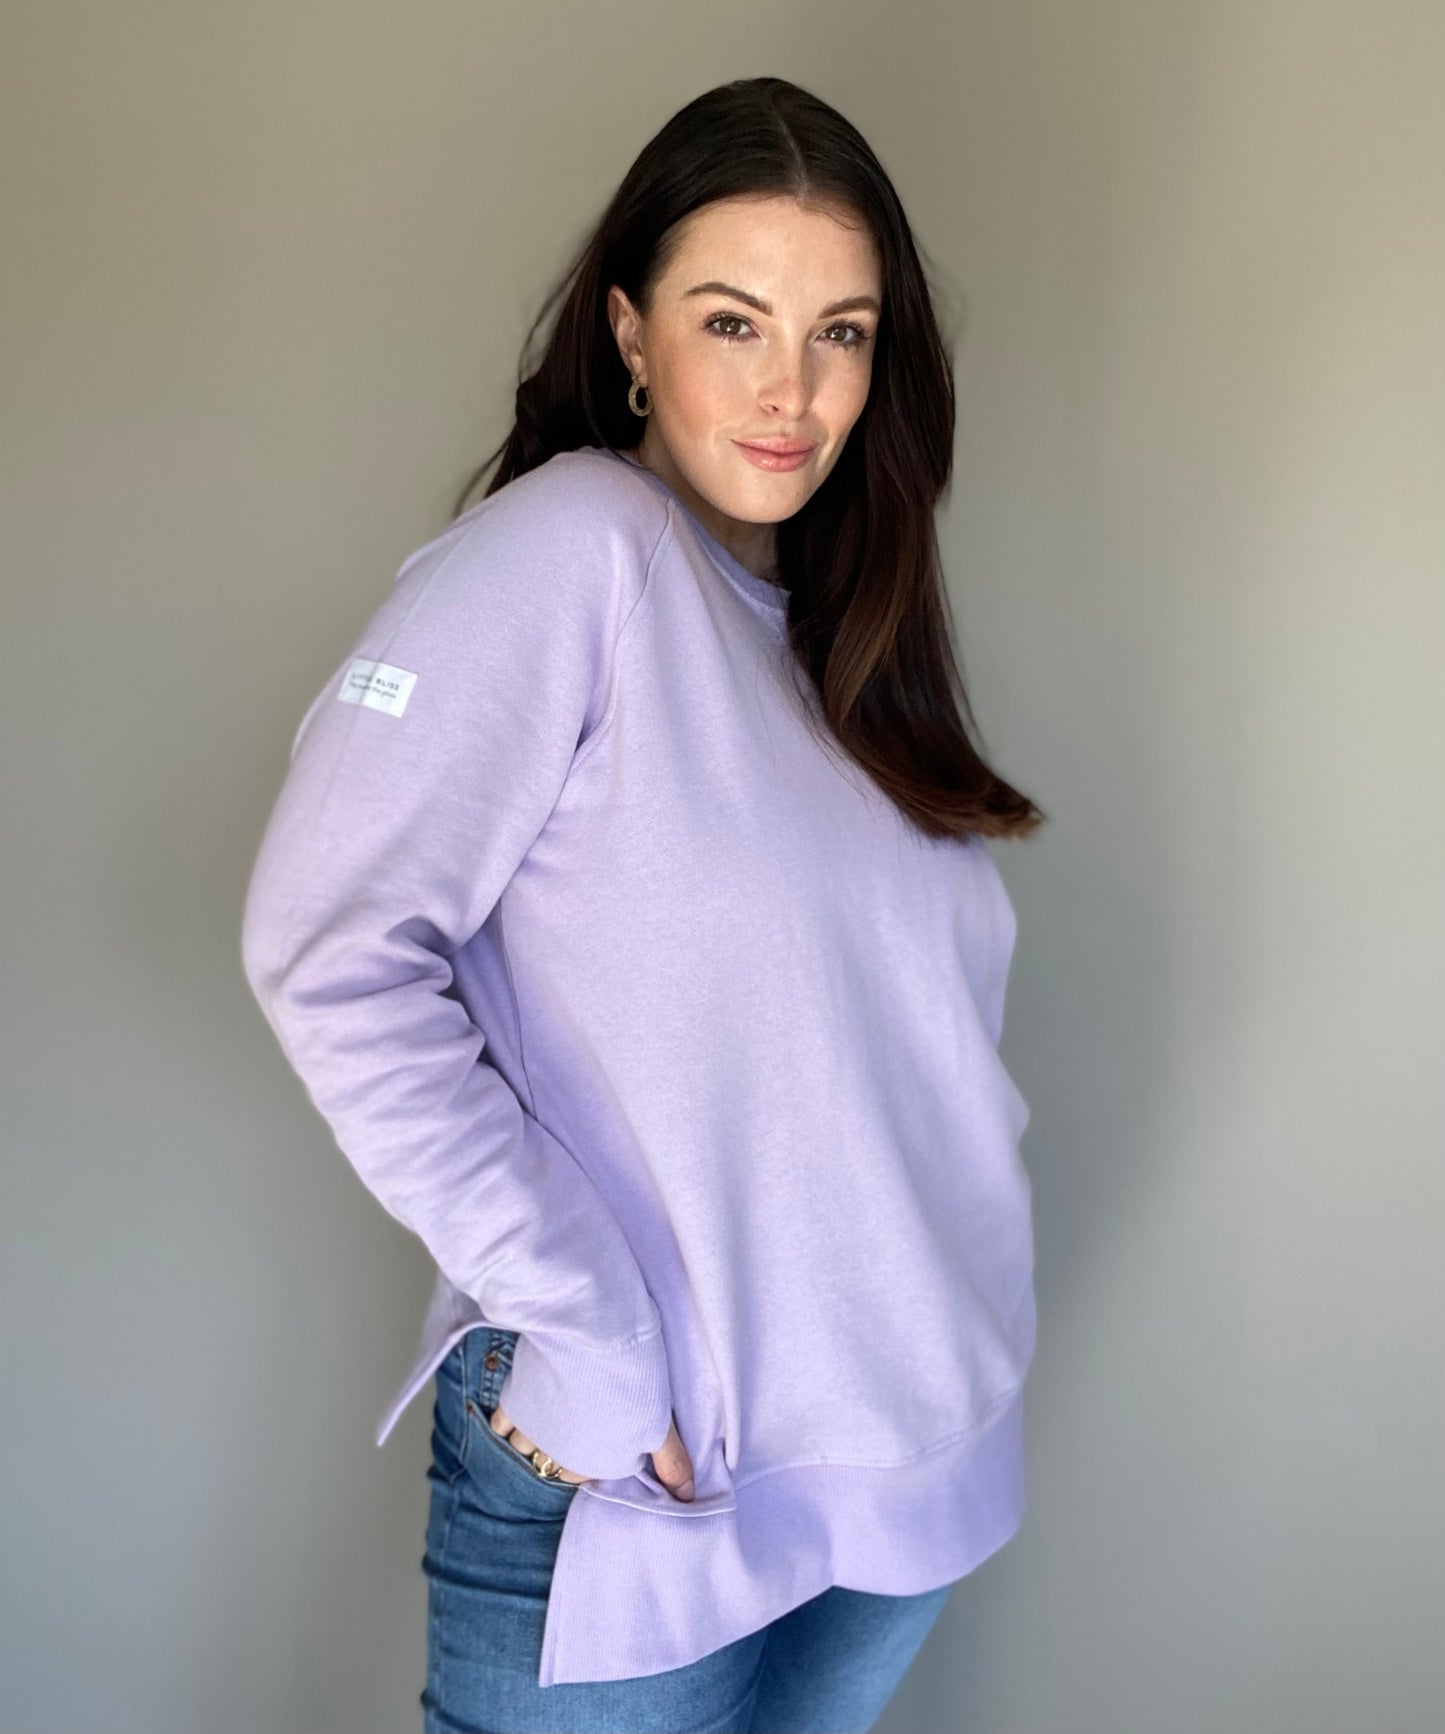 The Luxe Sweatshirt in Lilac